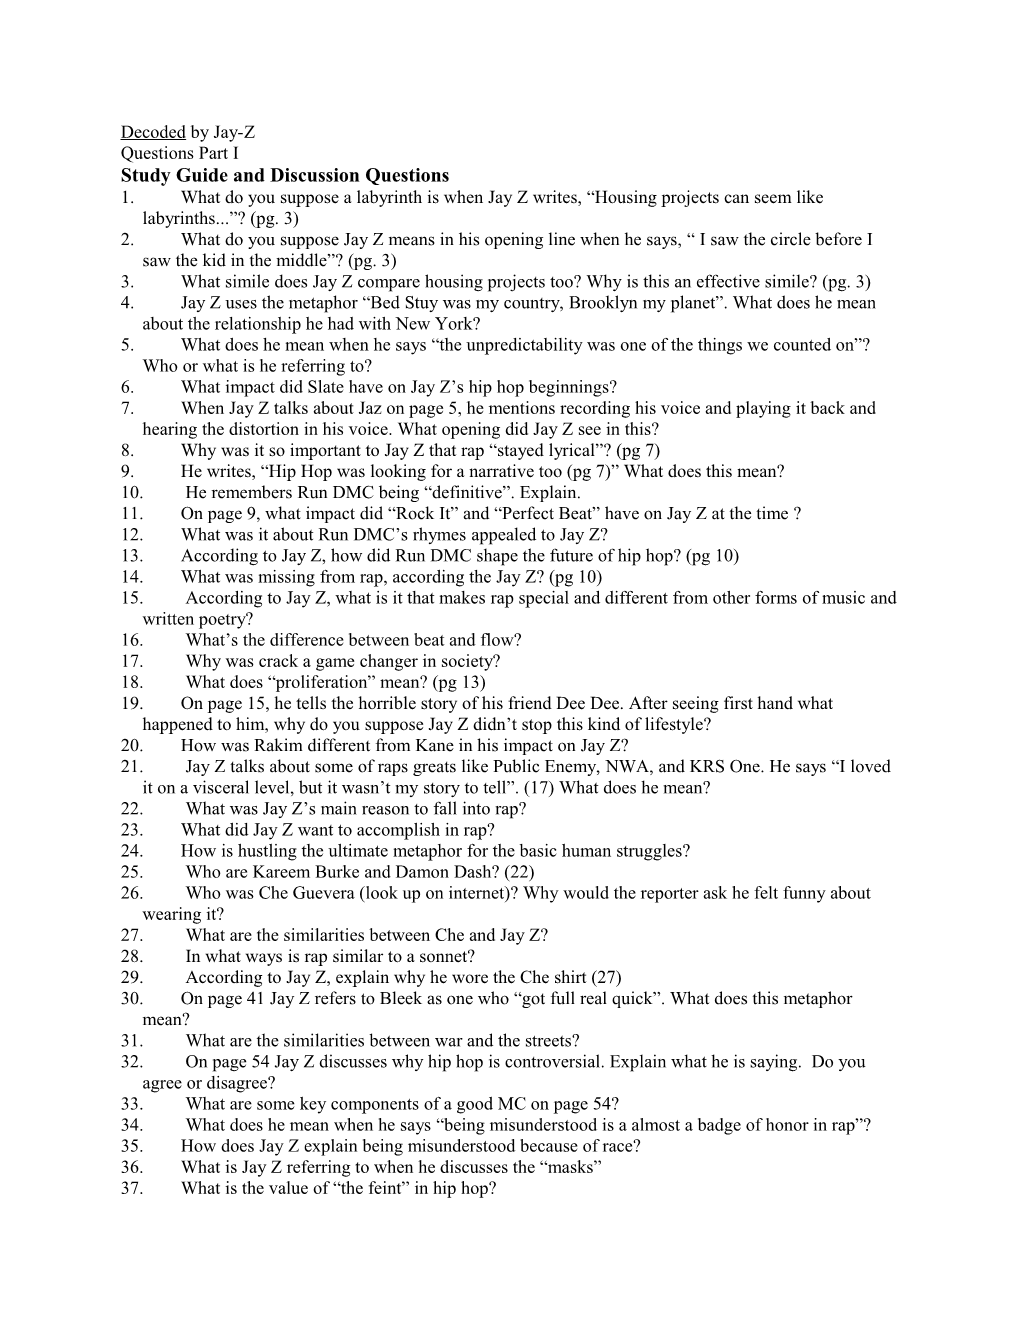 Study Guide and Discussion Questions